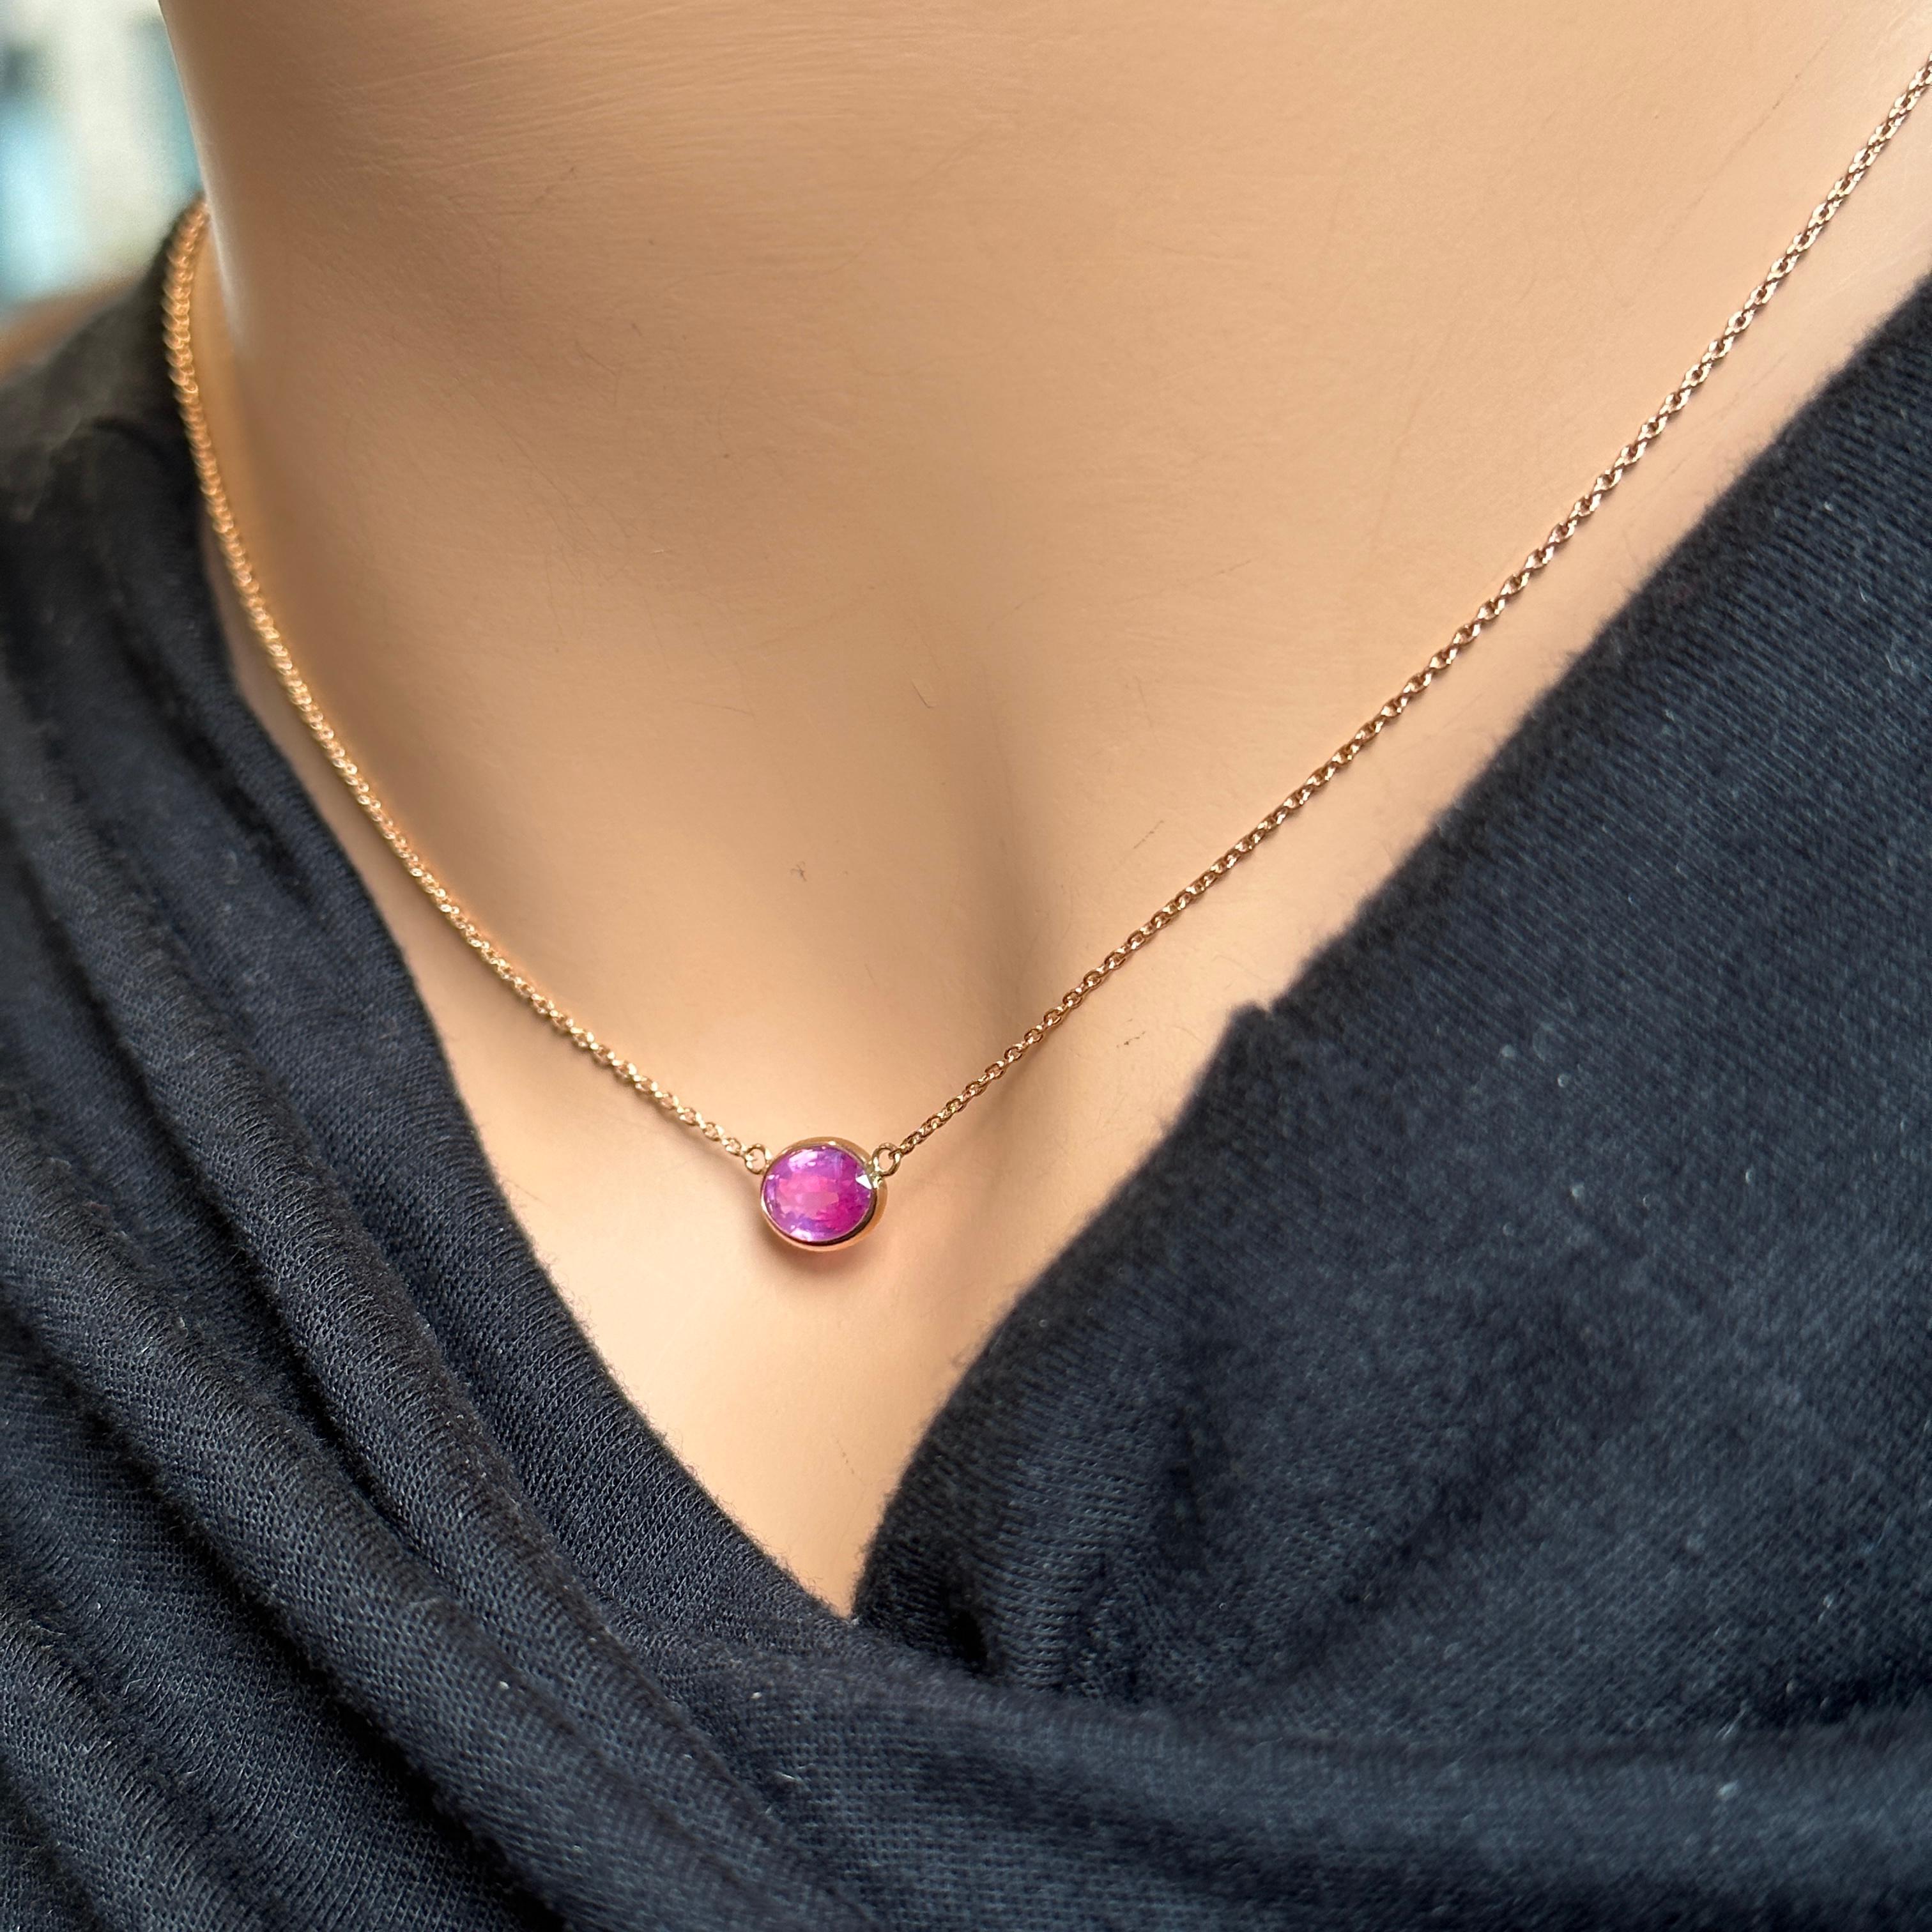 Oval Cut 1.74 Carat Pink Sapphire Oval & Fashion Necklaces Berberyn Certified In 14K RG For Sale